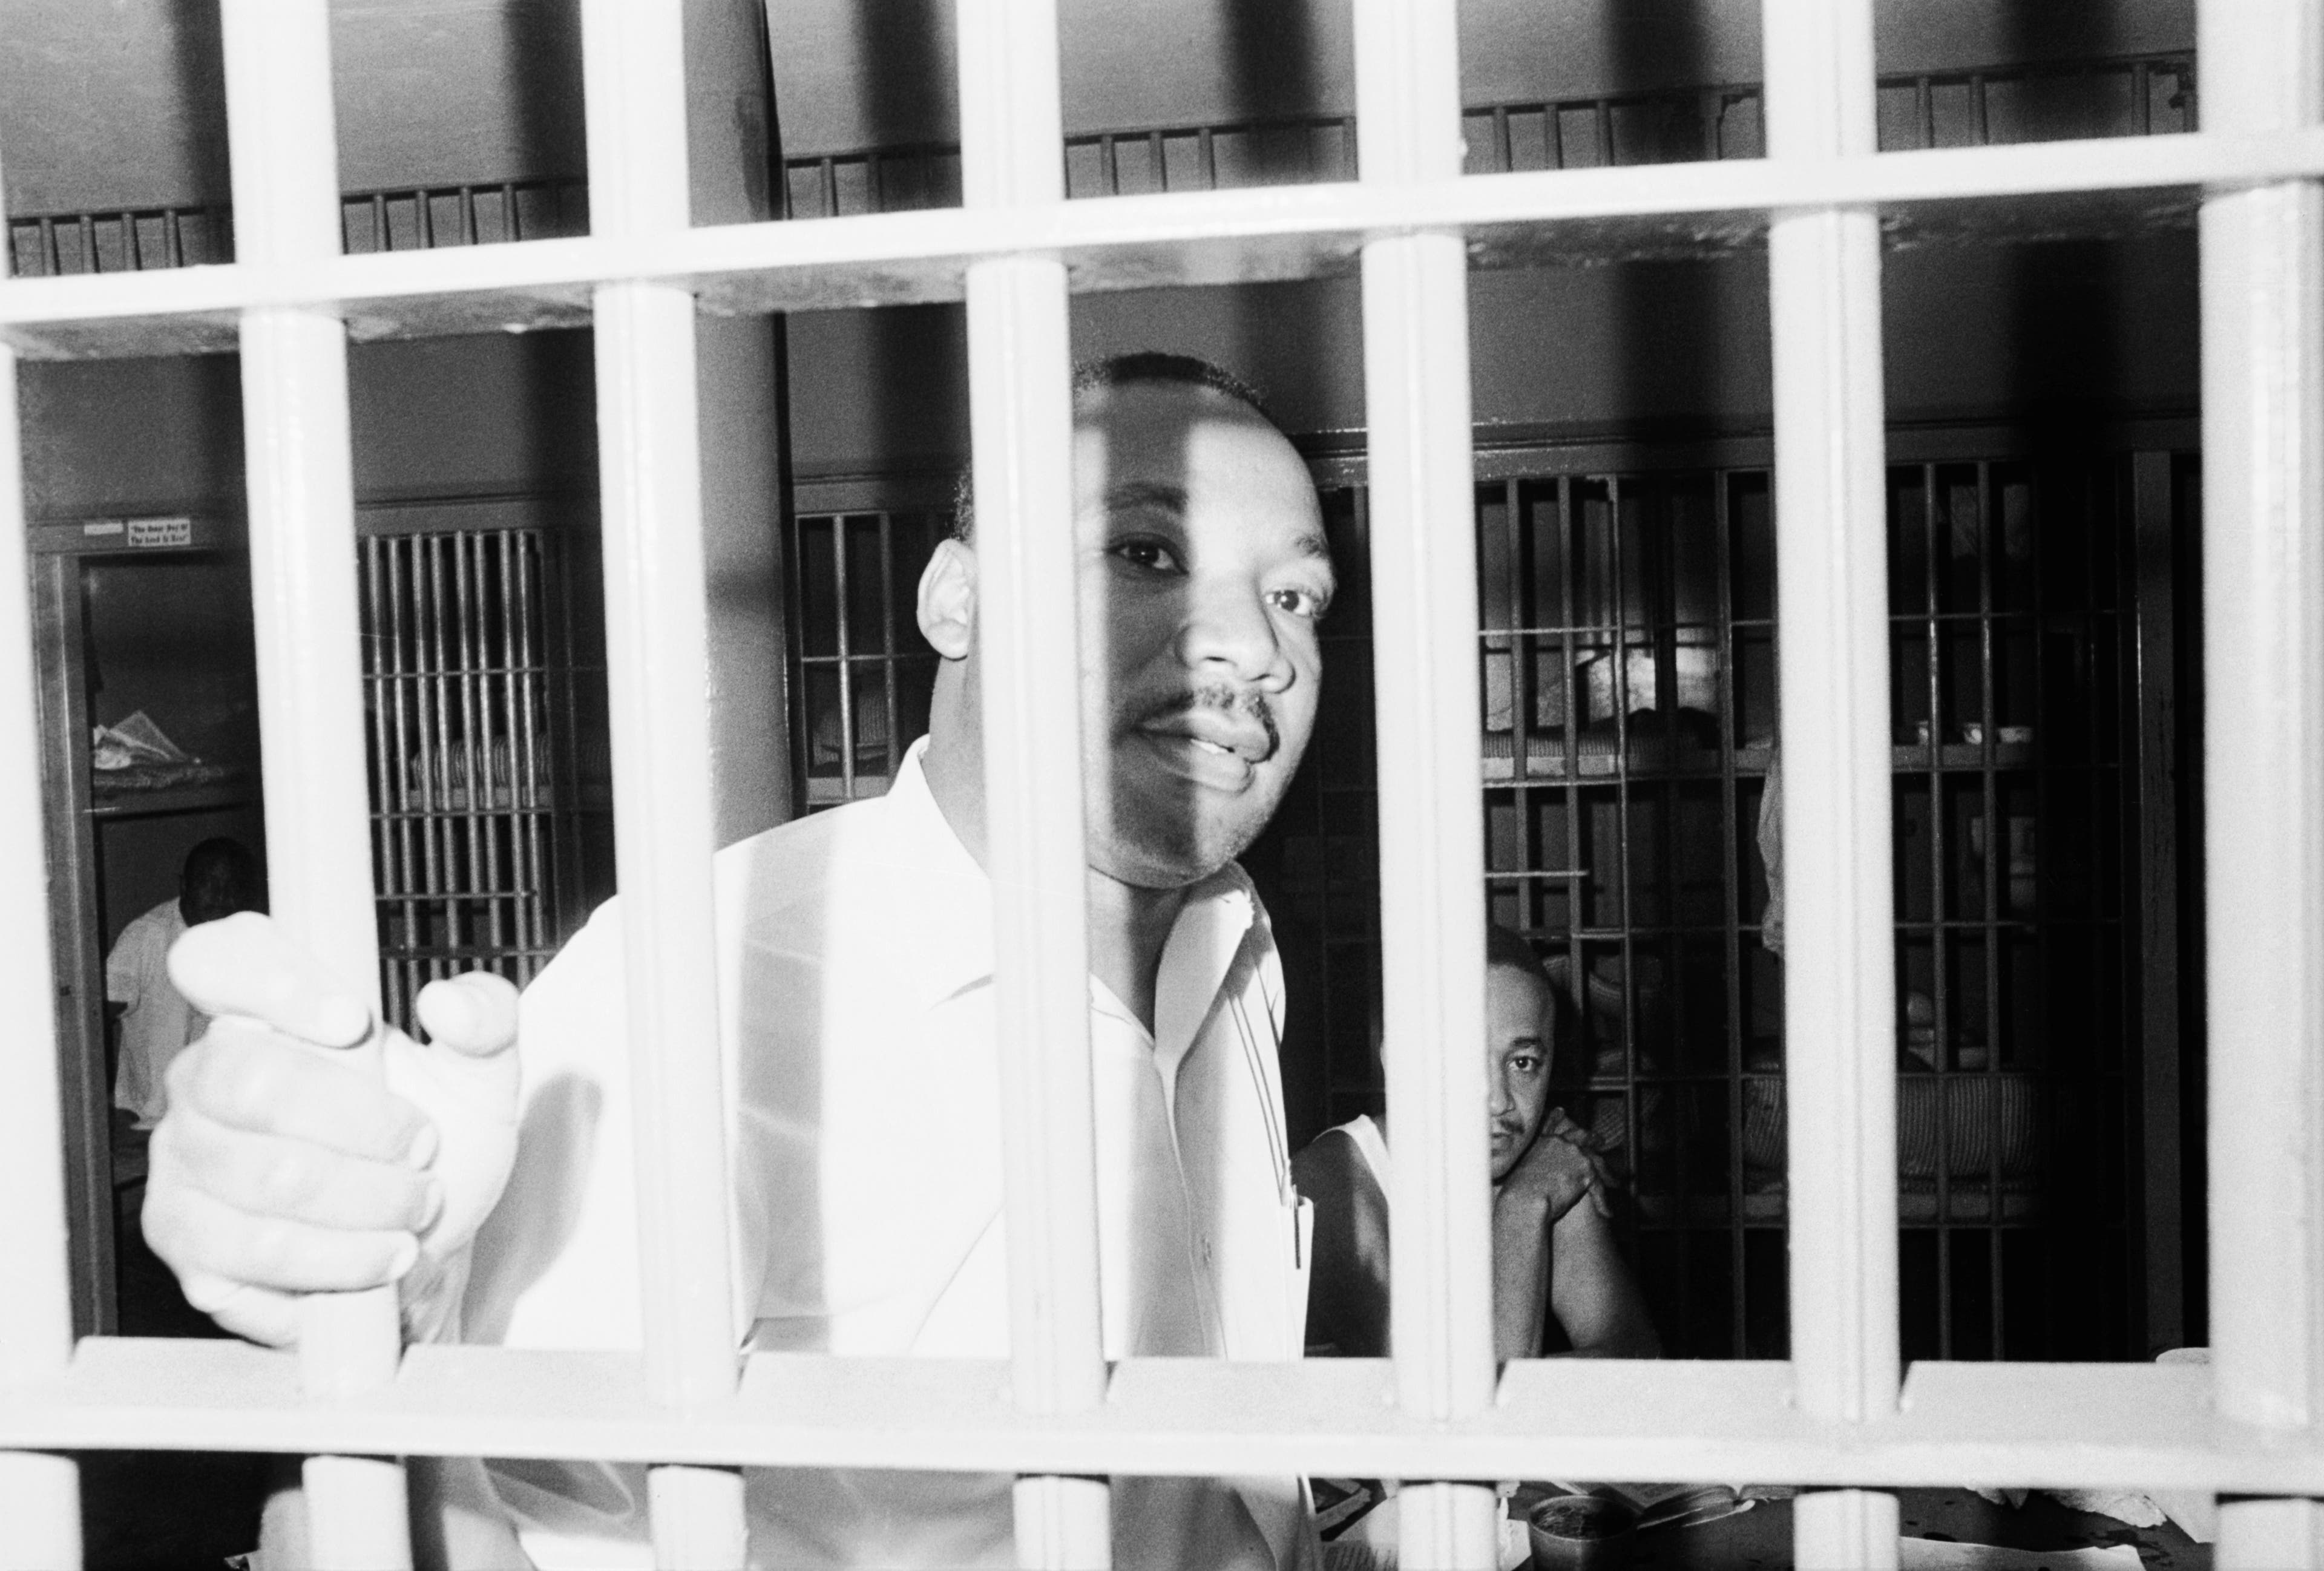 Dr. Martin Luther King in Jail Cell